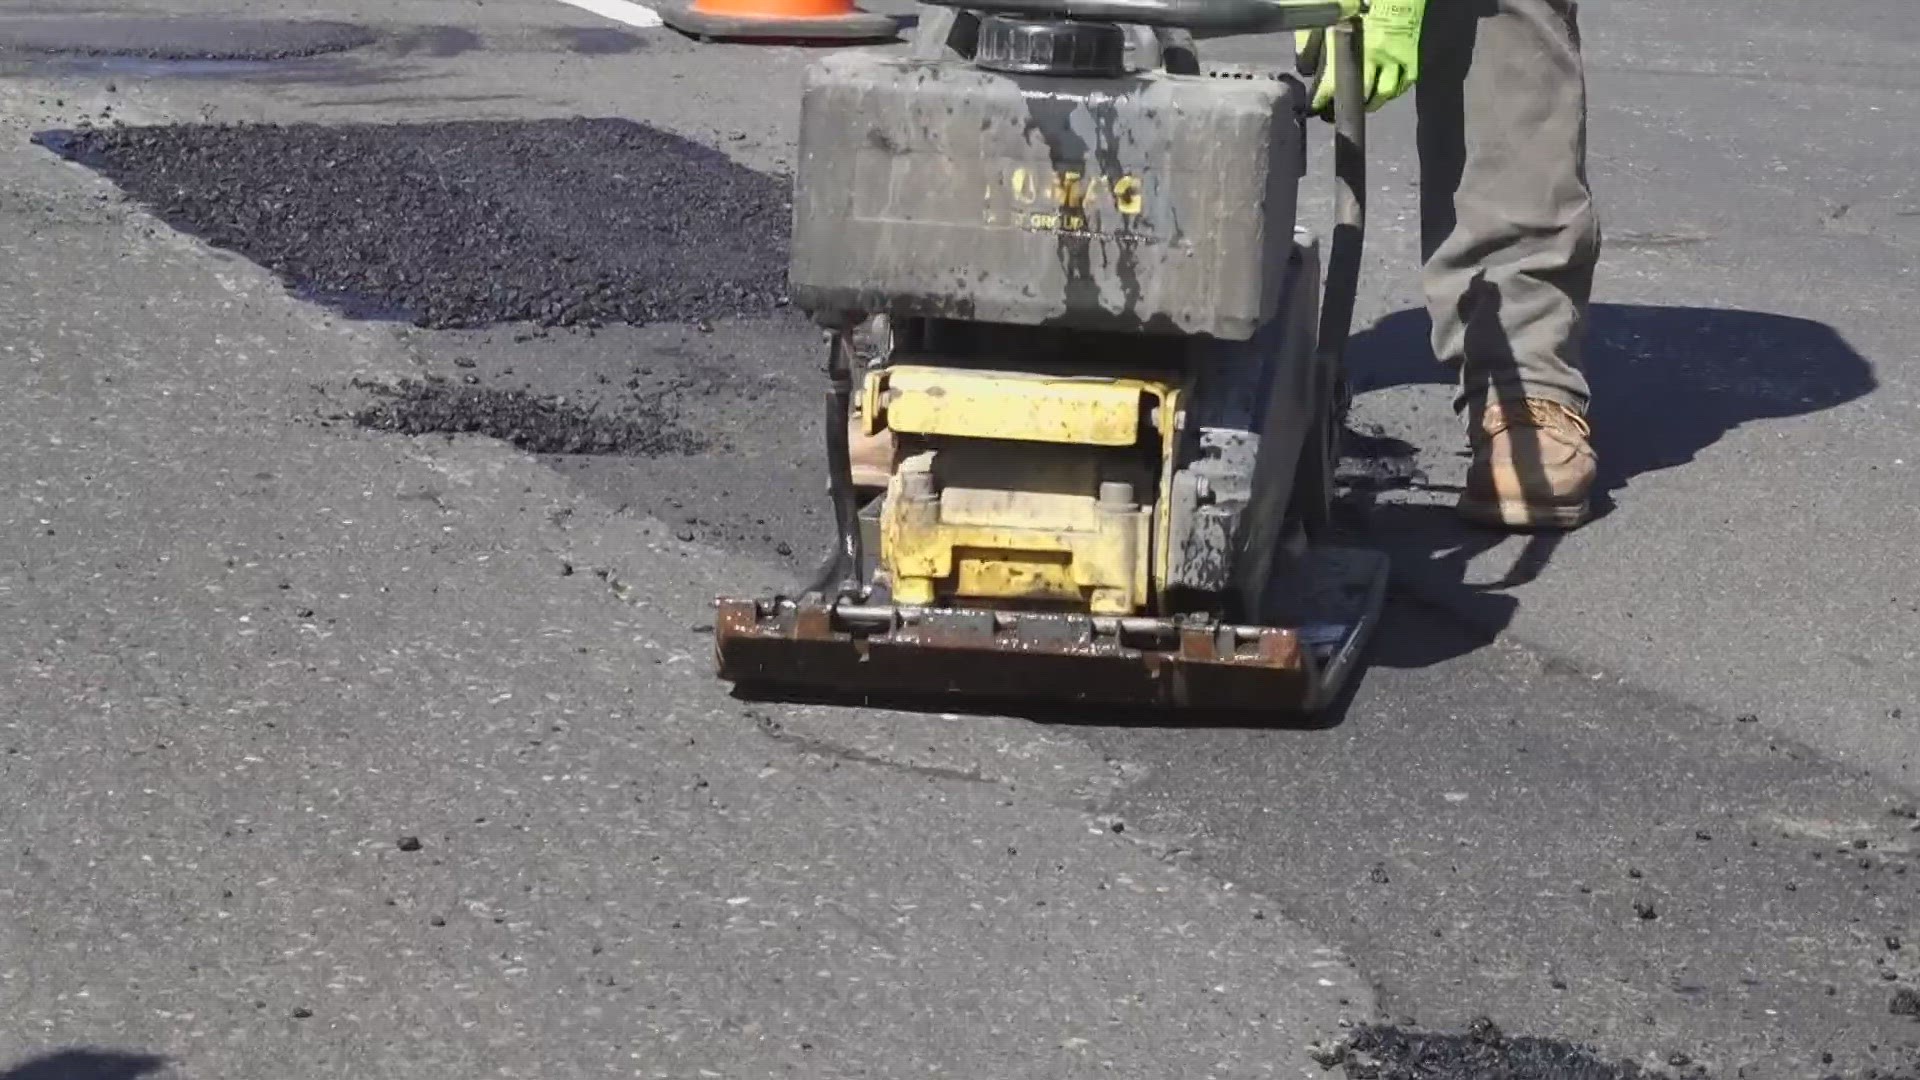 West Sacramento's public works streets team filled 980 potholes from January 1 to March 20, over 35 days of filling. They say rain kept them from doing more.